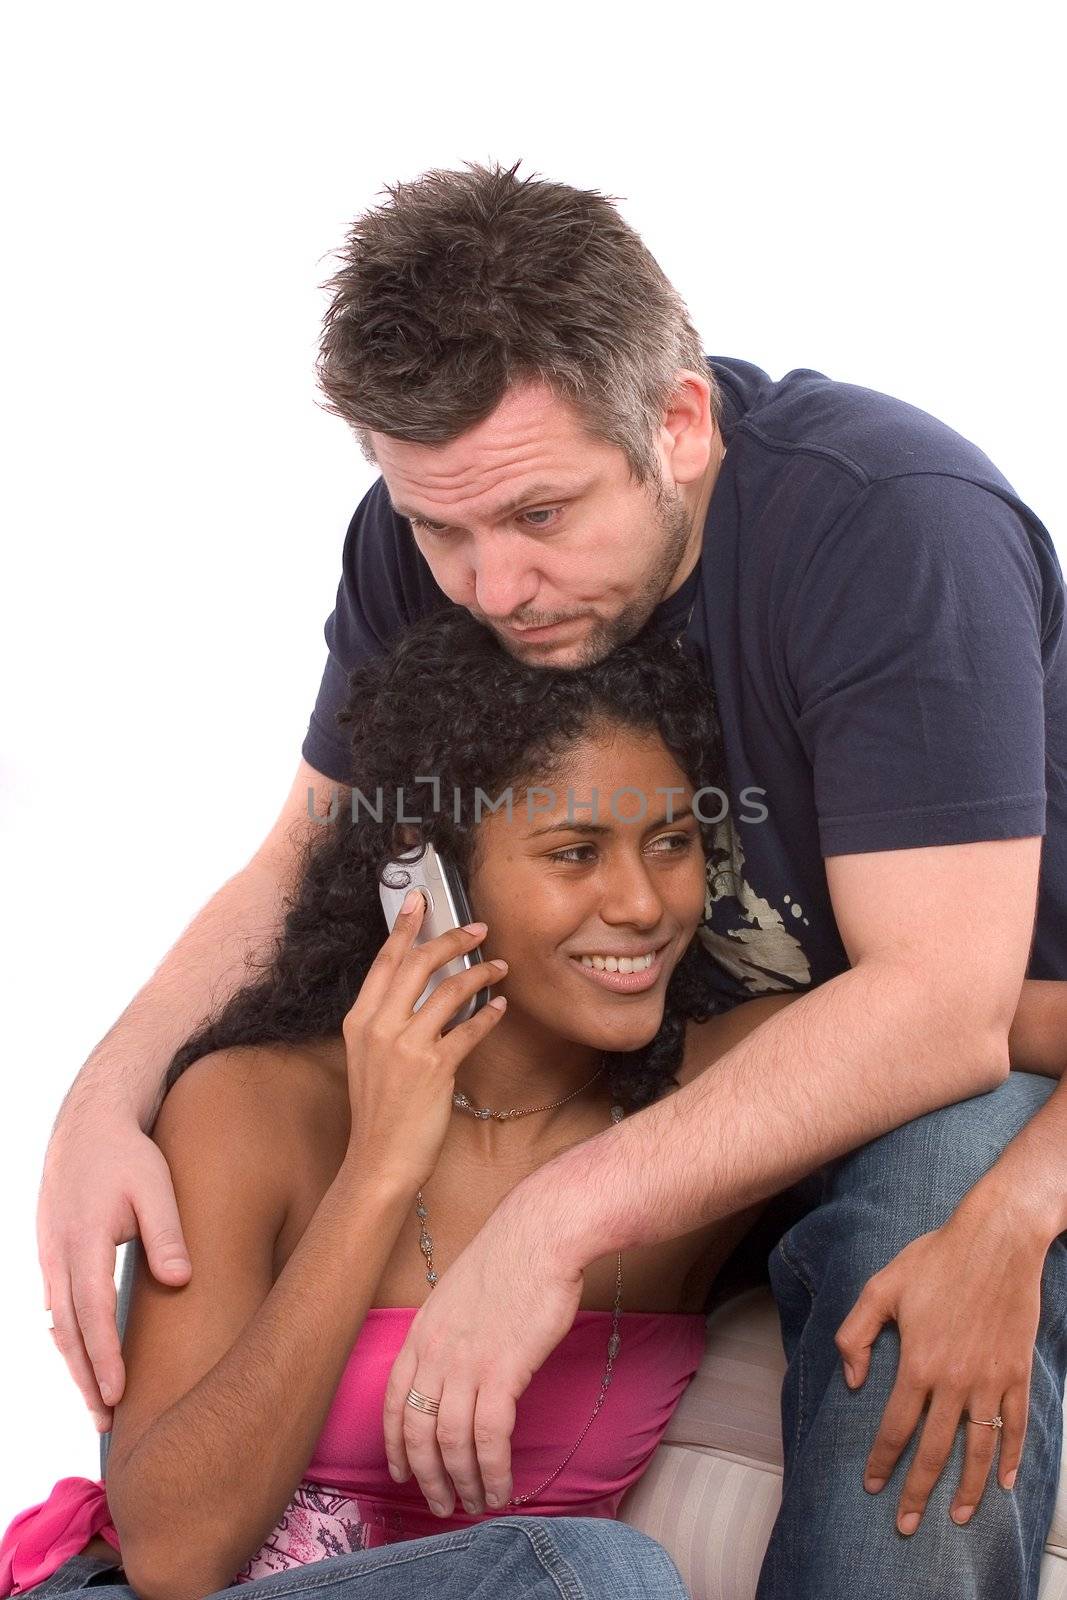 Man looking very bored while his girlfiend keeps talking on the phone